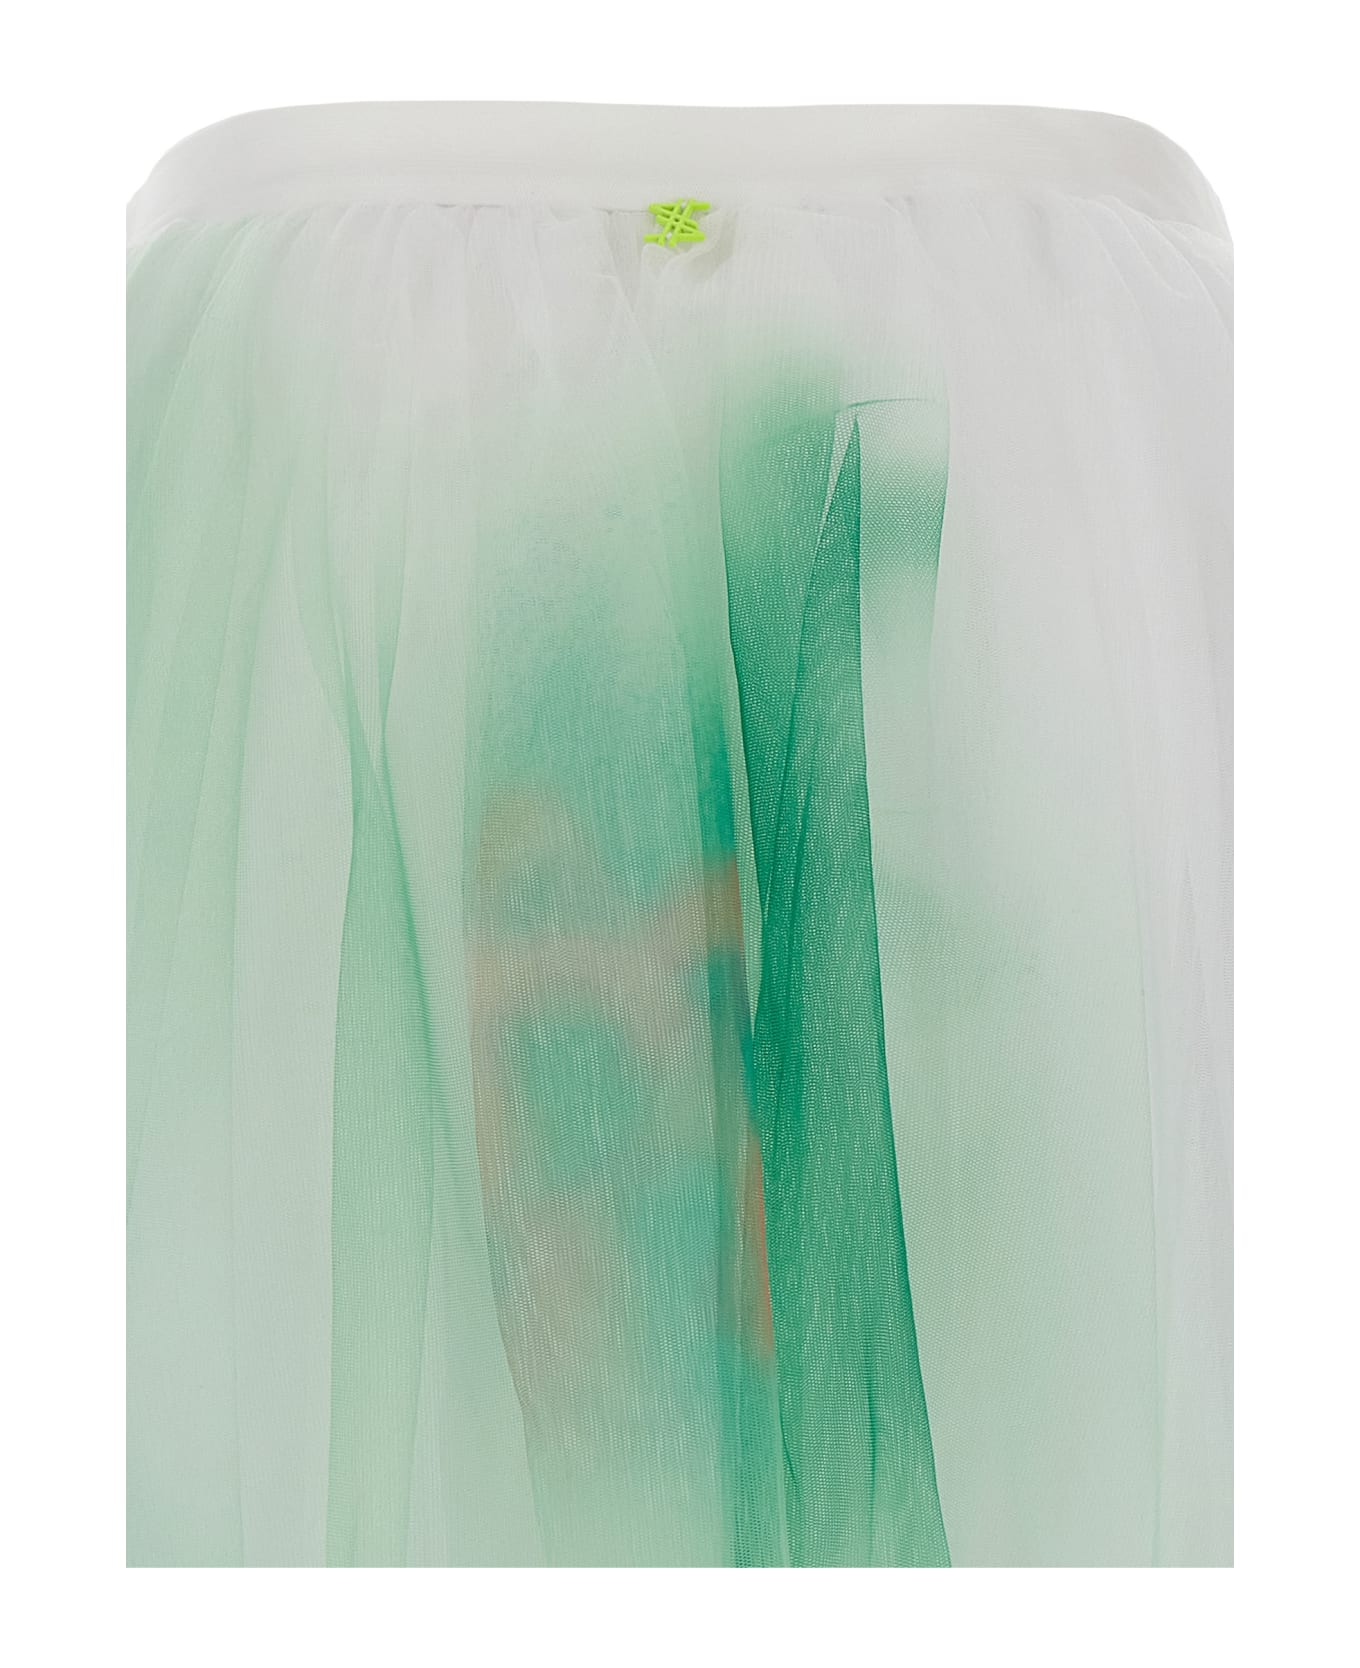 TwinSet Multicolor Tulle Skirt - Multicolor